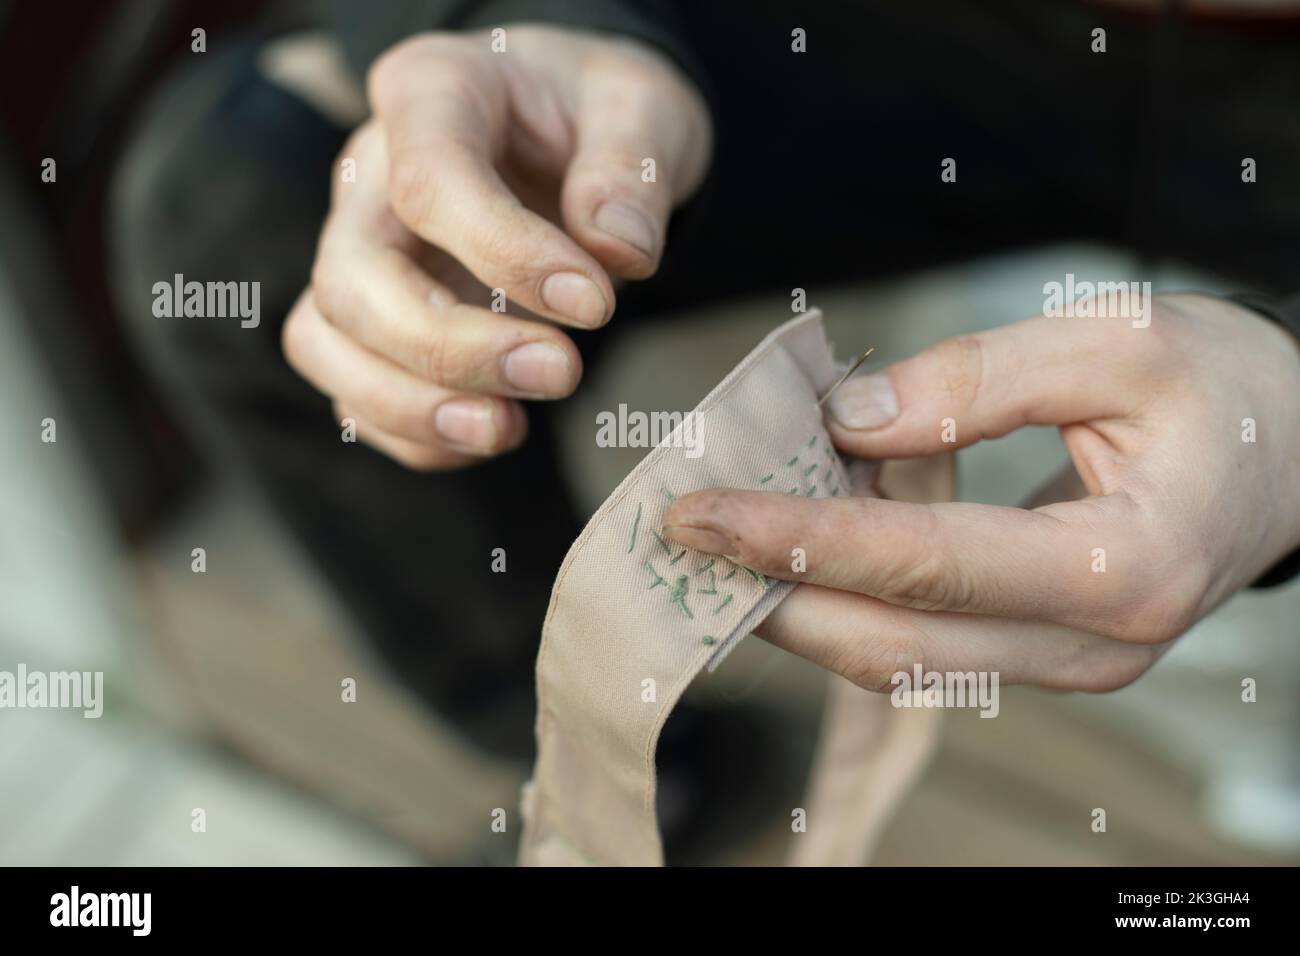 Sewing tape. Collar stitching in army. Work of weaver. Repair clothes with your own hands. Stock Photo